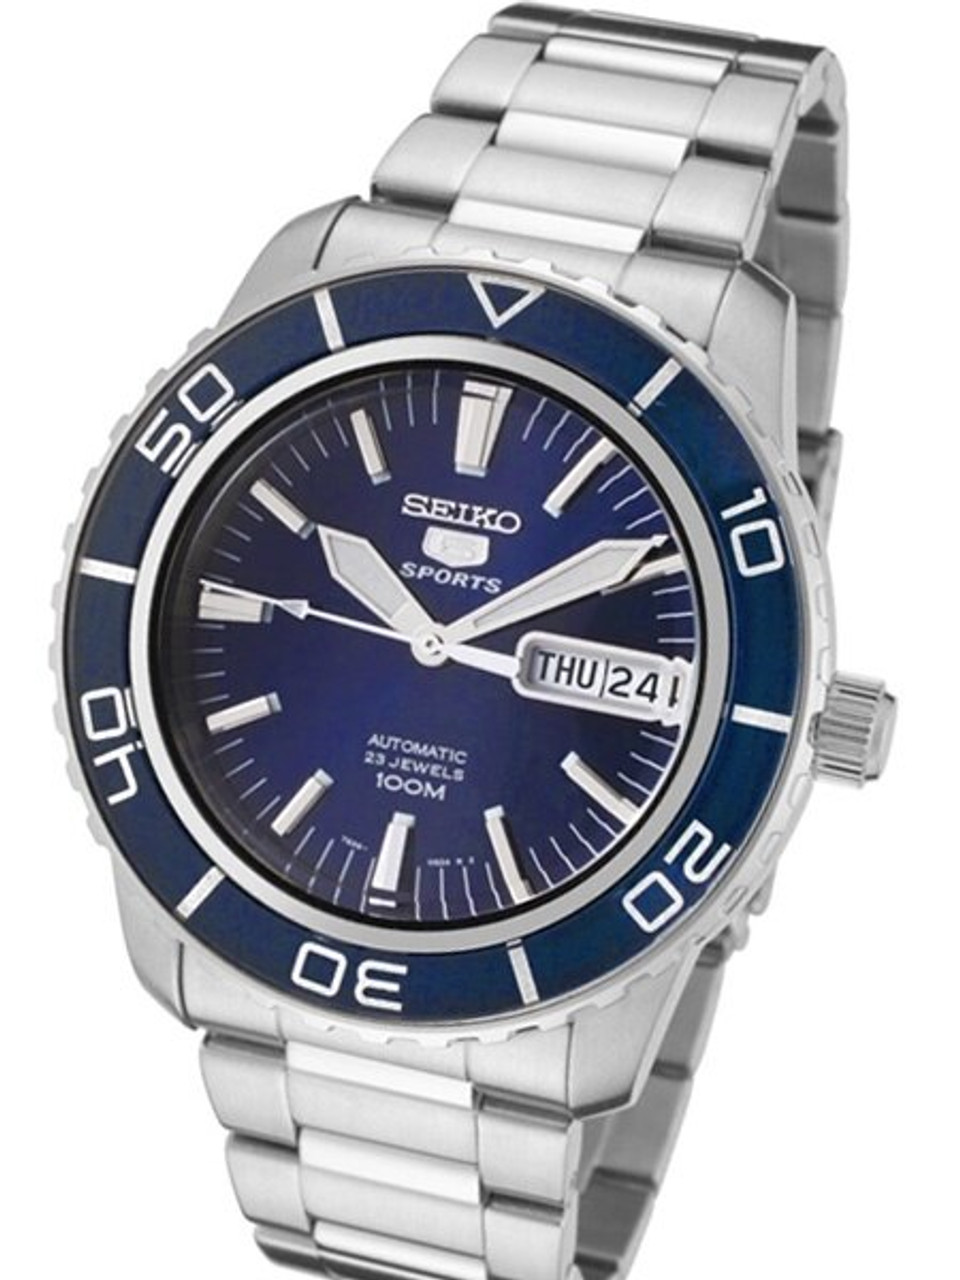 Seiko 41mm Sports 5, 23-Jewel Automatic Watch with Day and Date Window # SNZH53K1